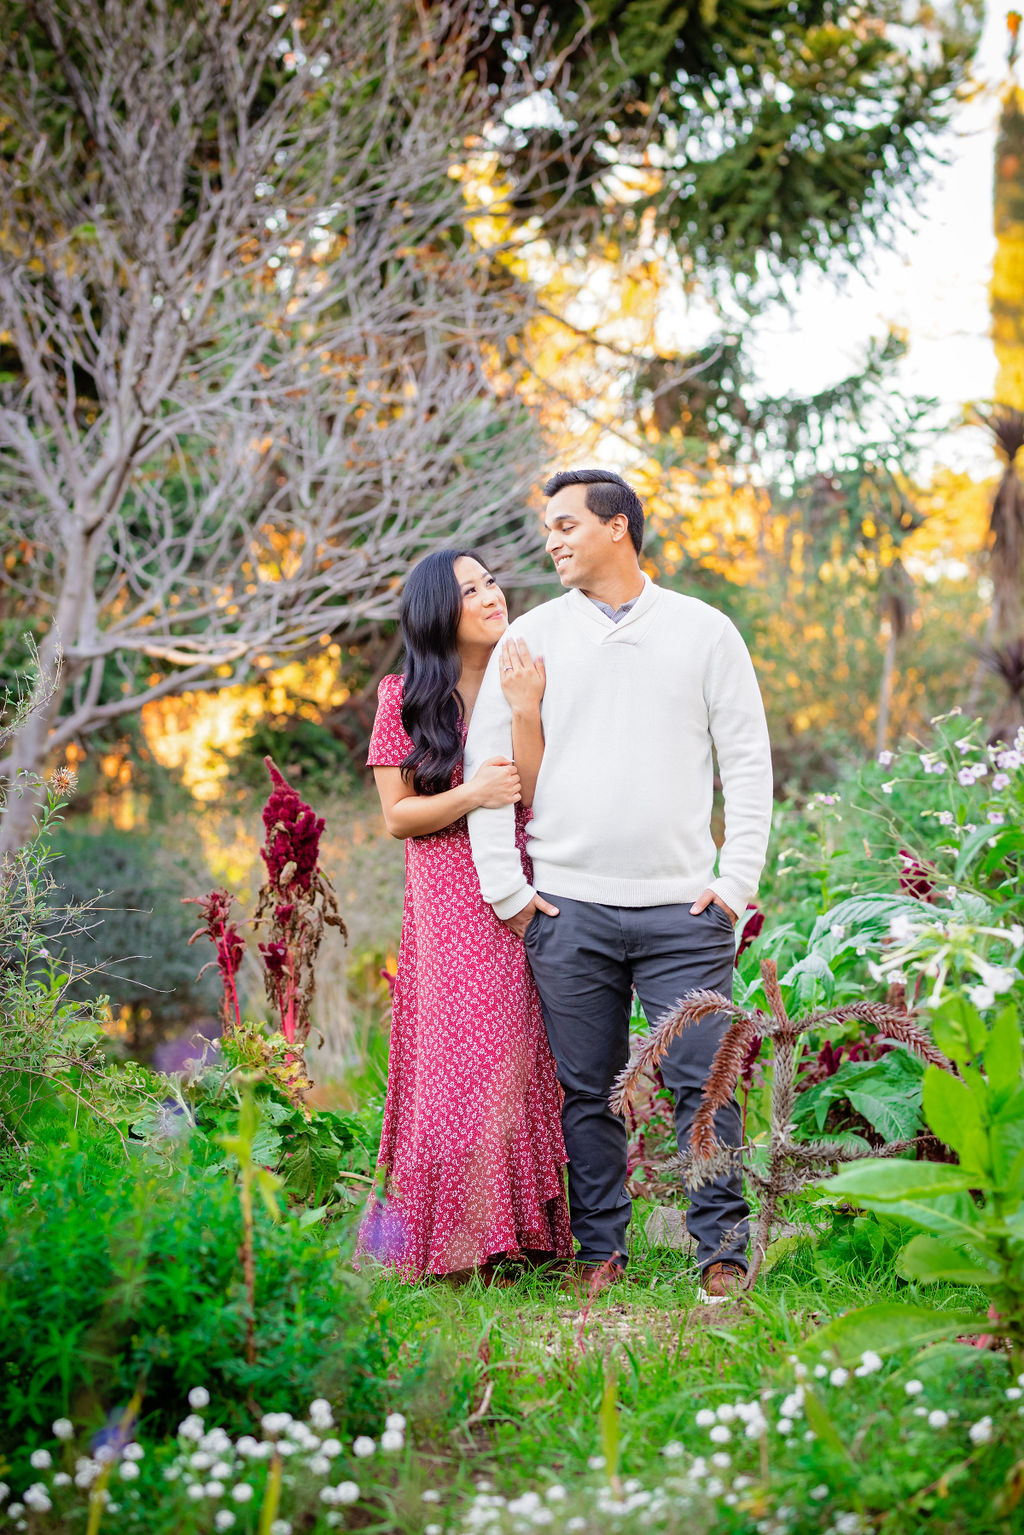 Woman holding on to man in a garden at sunset in William Land Park Sacramento Engagement Photo Locations